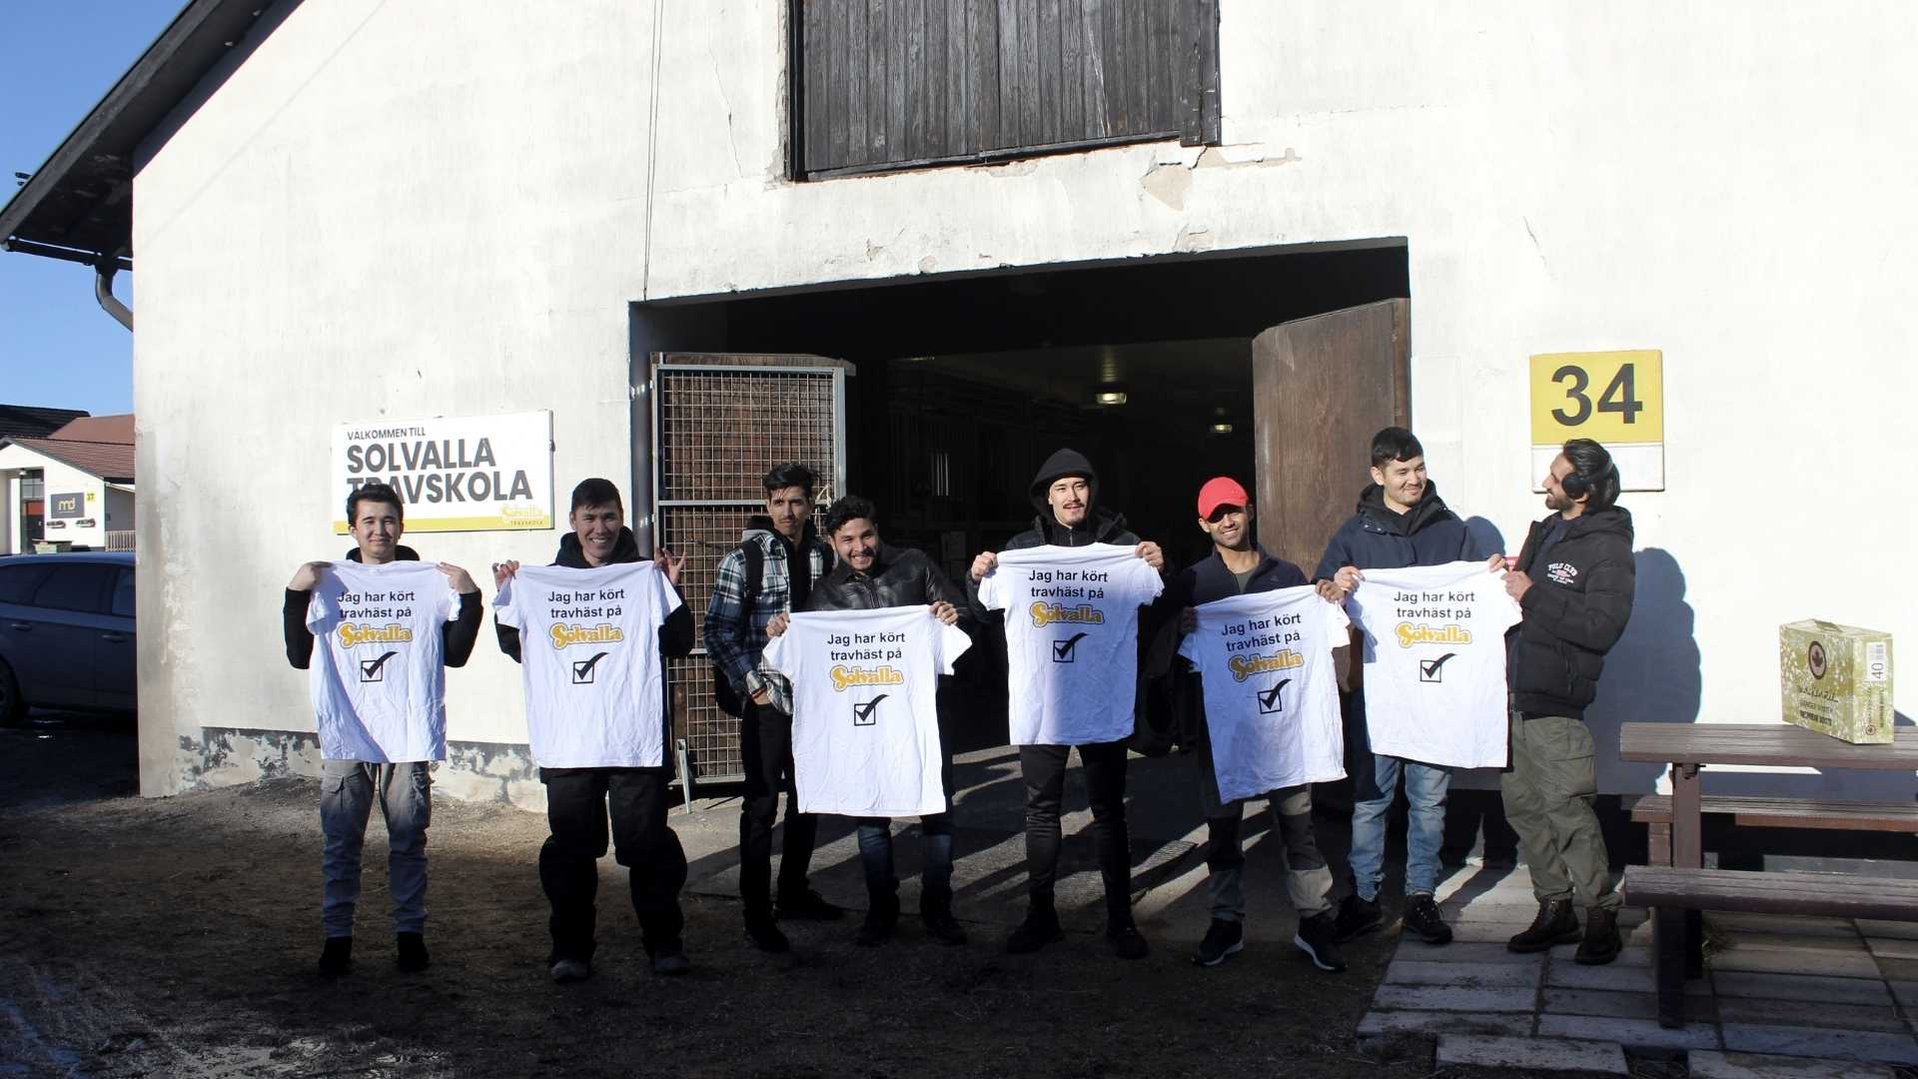 Youth participants of project Travkraft on Solvalla in Sweden